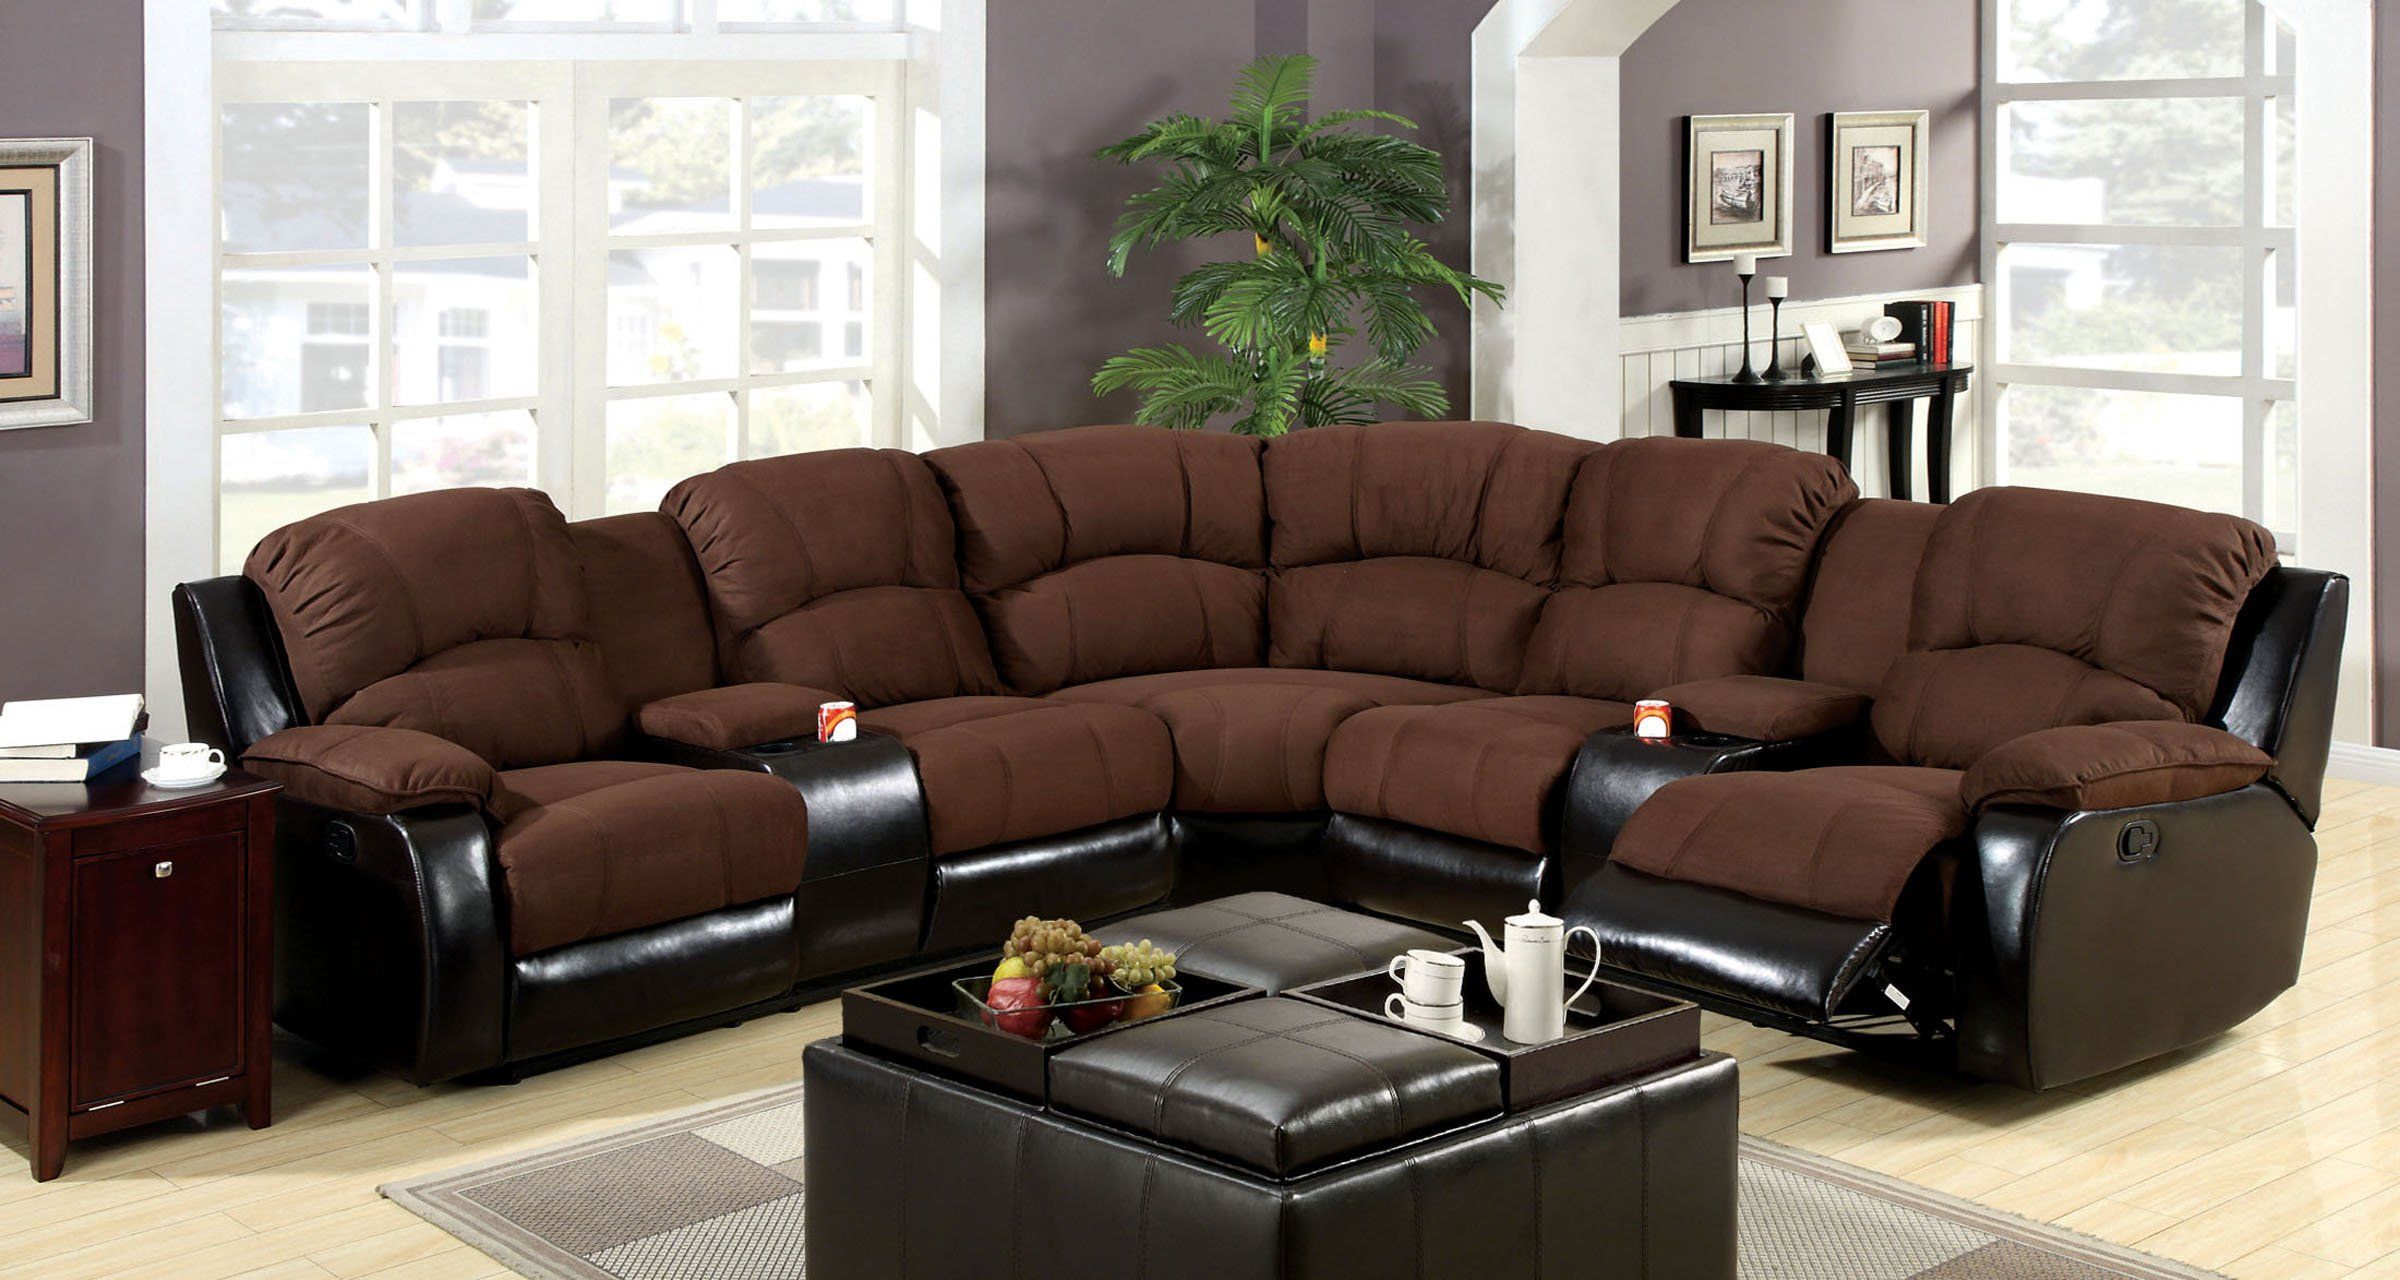 Wolcott Cm6557 Transitional Two Tone 2 Recliners Sectional Sofa Couch With Regard To 2 Tone Chocolate Microfiber Sofas (View 18 of 20)